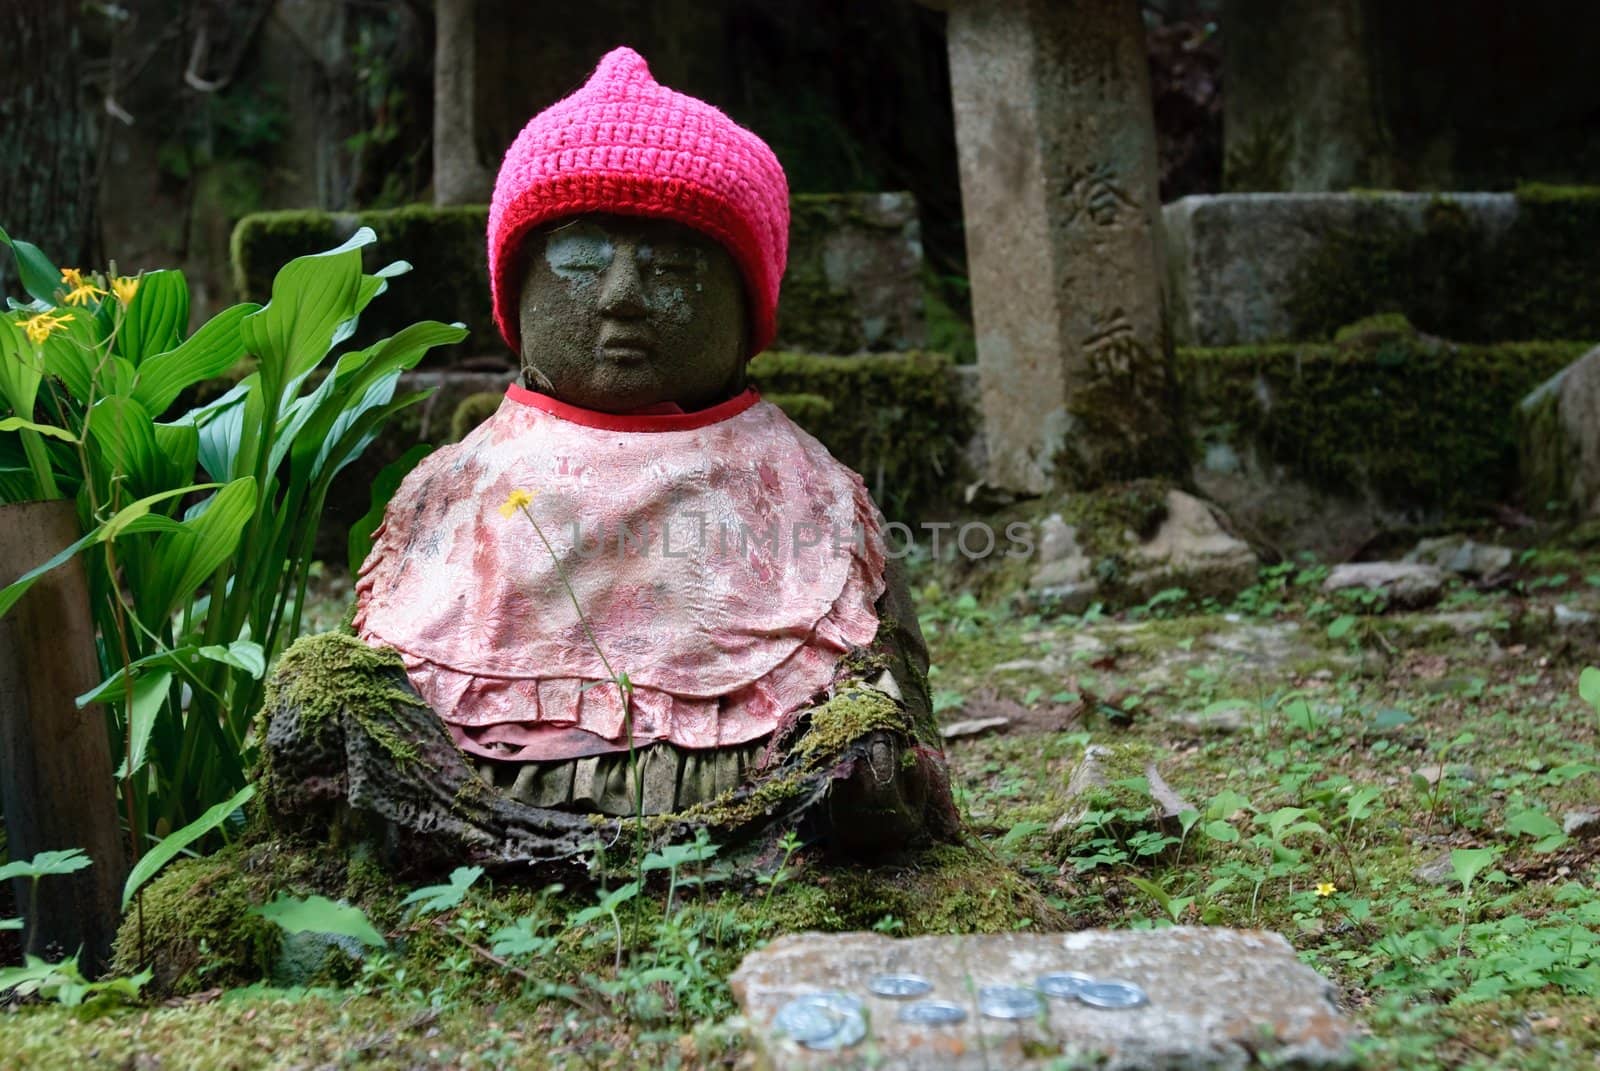 Tiny budda with a red hat at Mount Koya, Japan. by 300pixel